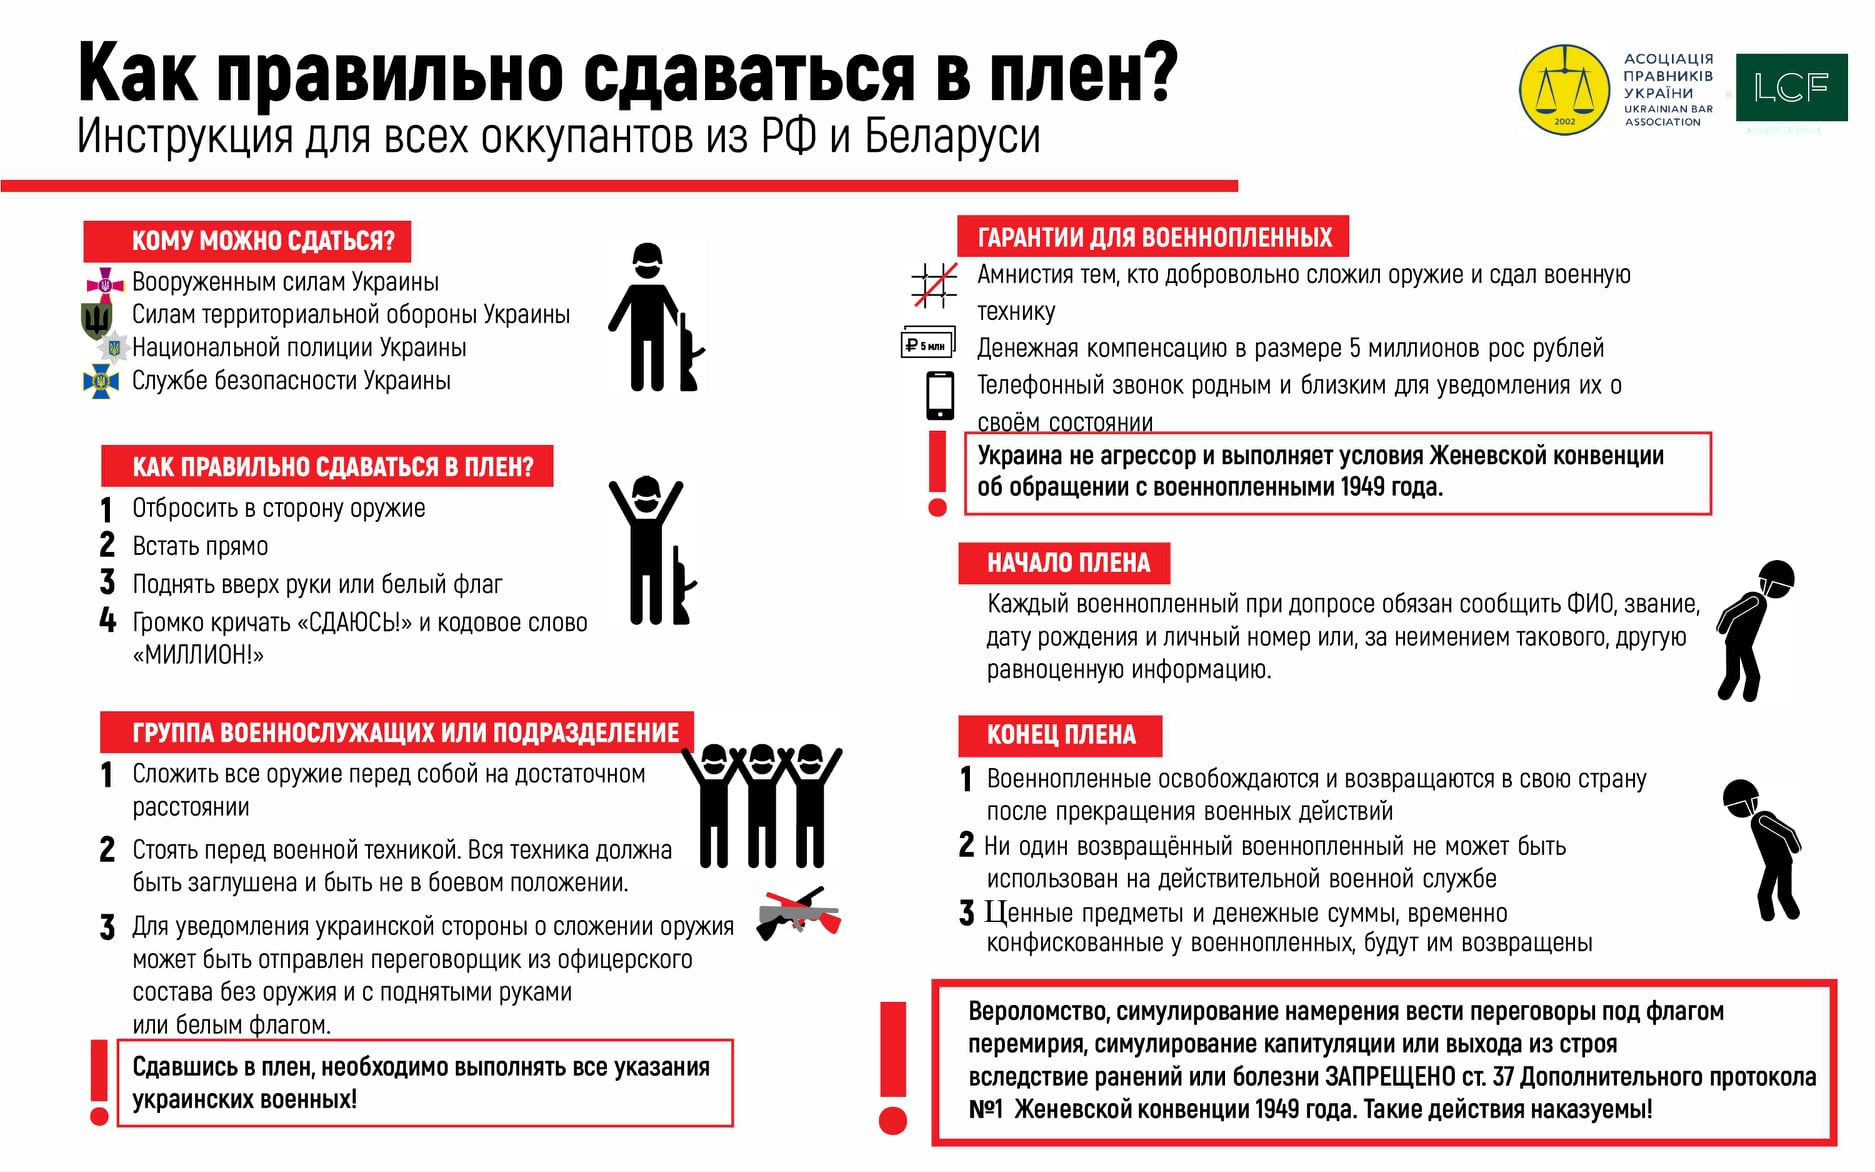 A guide for Russian and Belarusian invaders in Ukraine "How to surrender properly?" created by the Ukrainian Bar Association and LCF Law Group